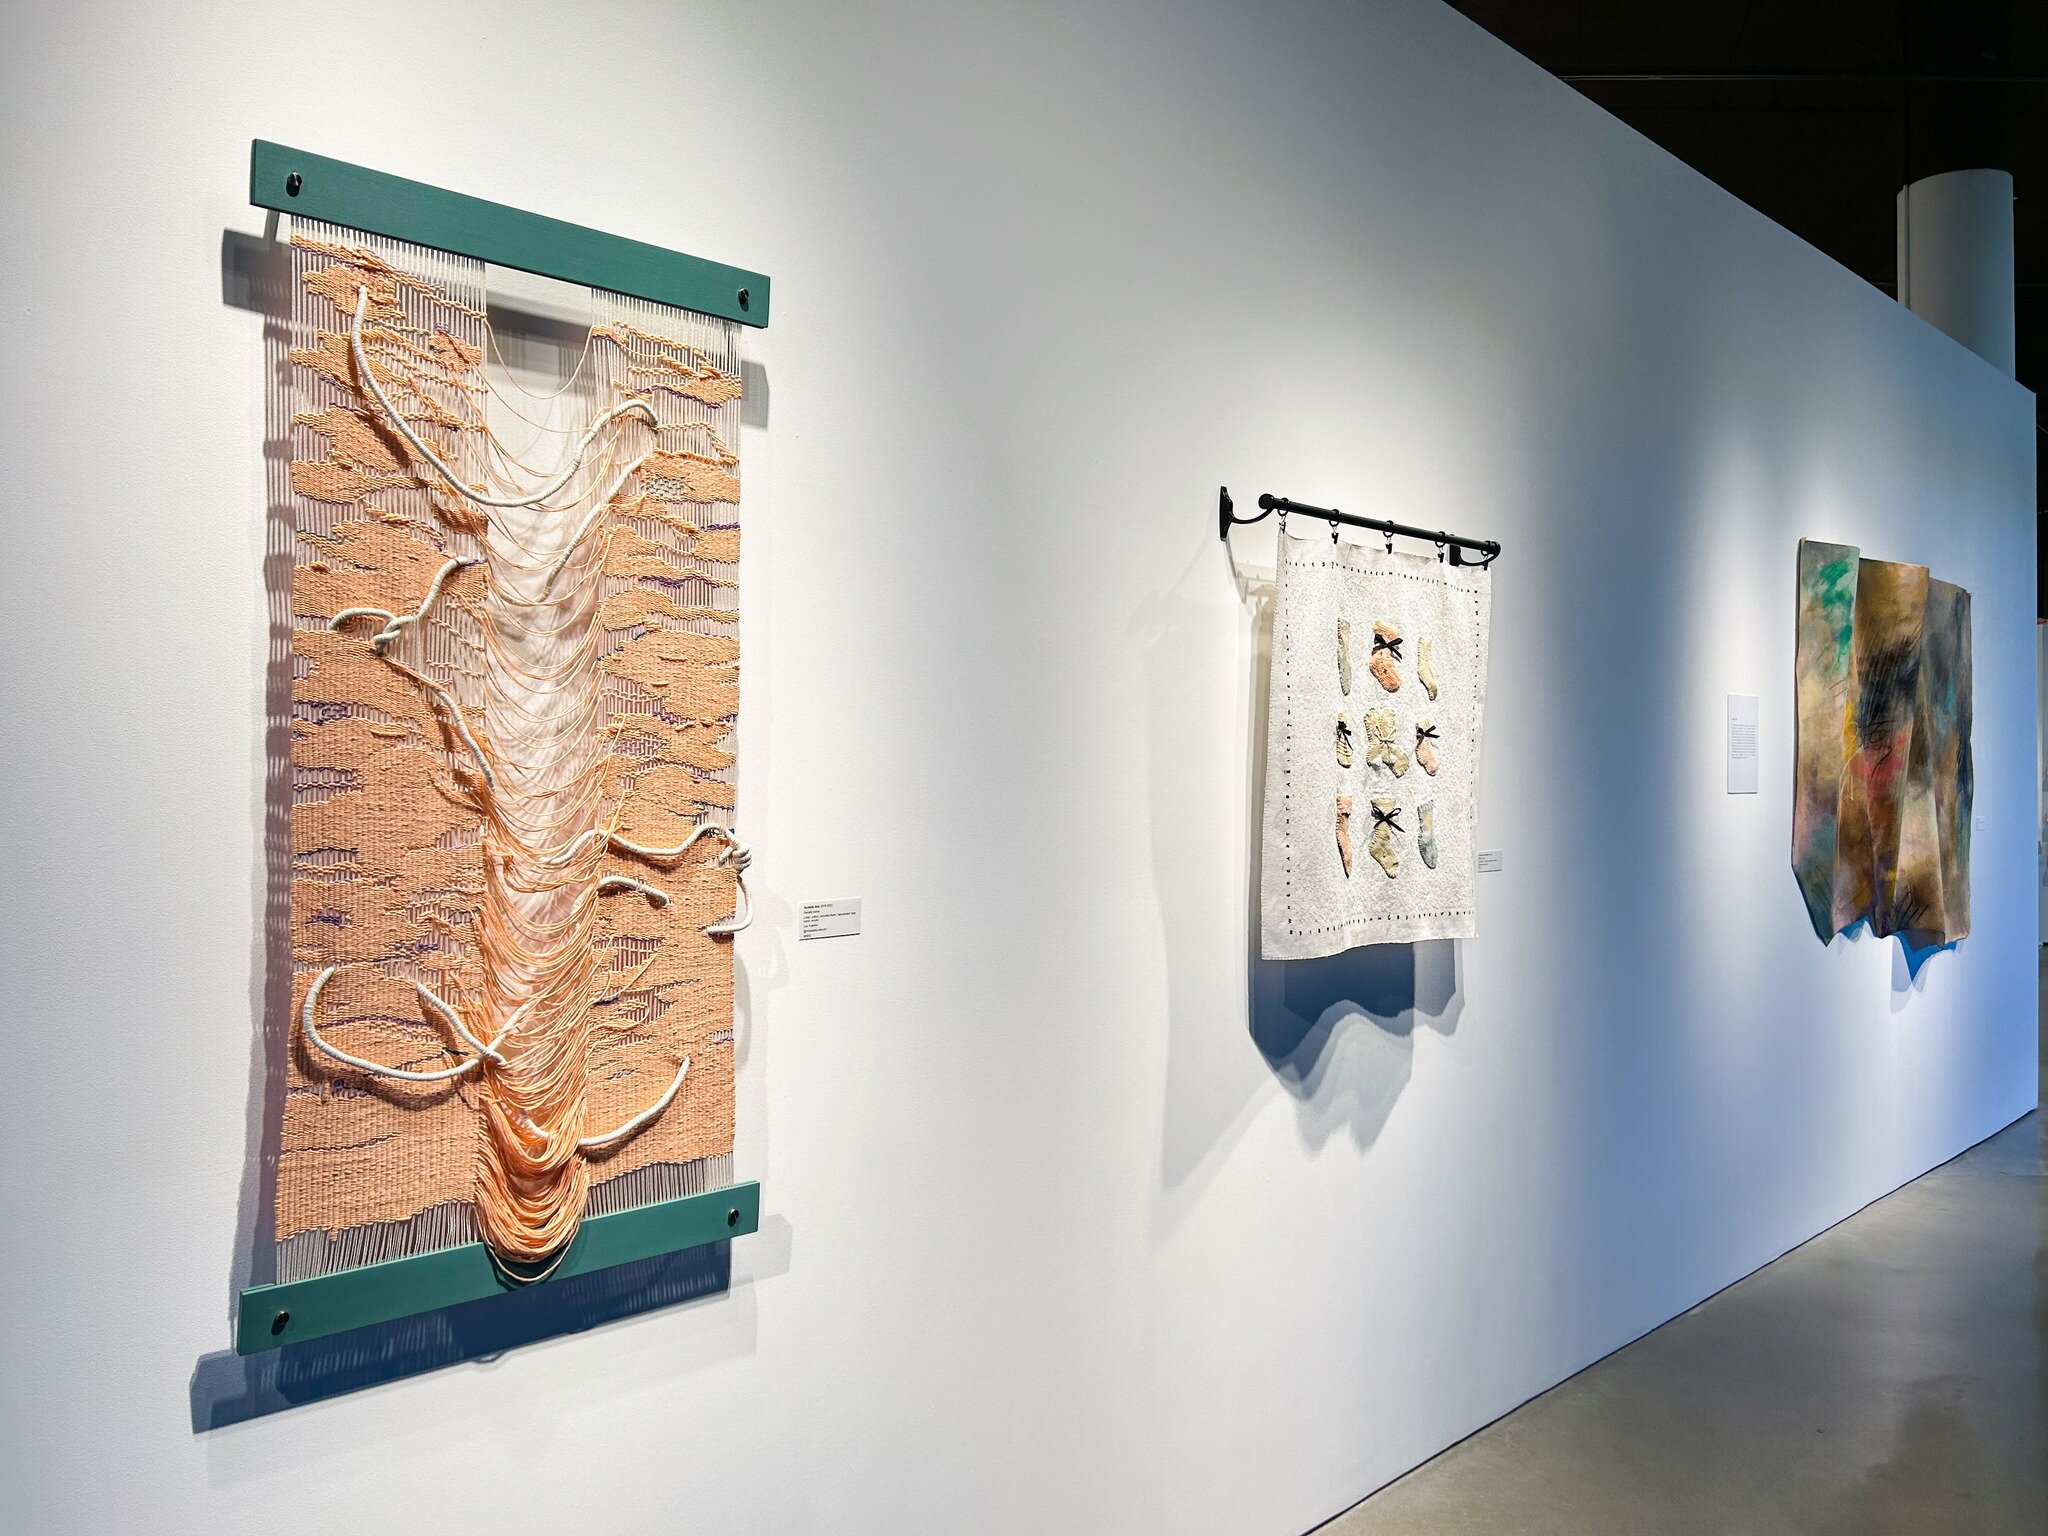 Who else is feeling full after yesterday? 🙋&zwj;♀️🦃 Well you can walk it off here checking out #ThreadsthatBind! 🪡✨

There's plenty of amazing artists to see in this exhibition! 😄 Fiber, textile, photography, acrylic, mixed media, you name it -- 